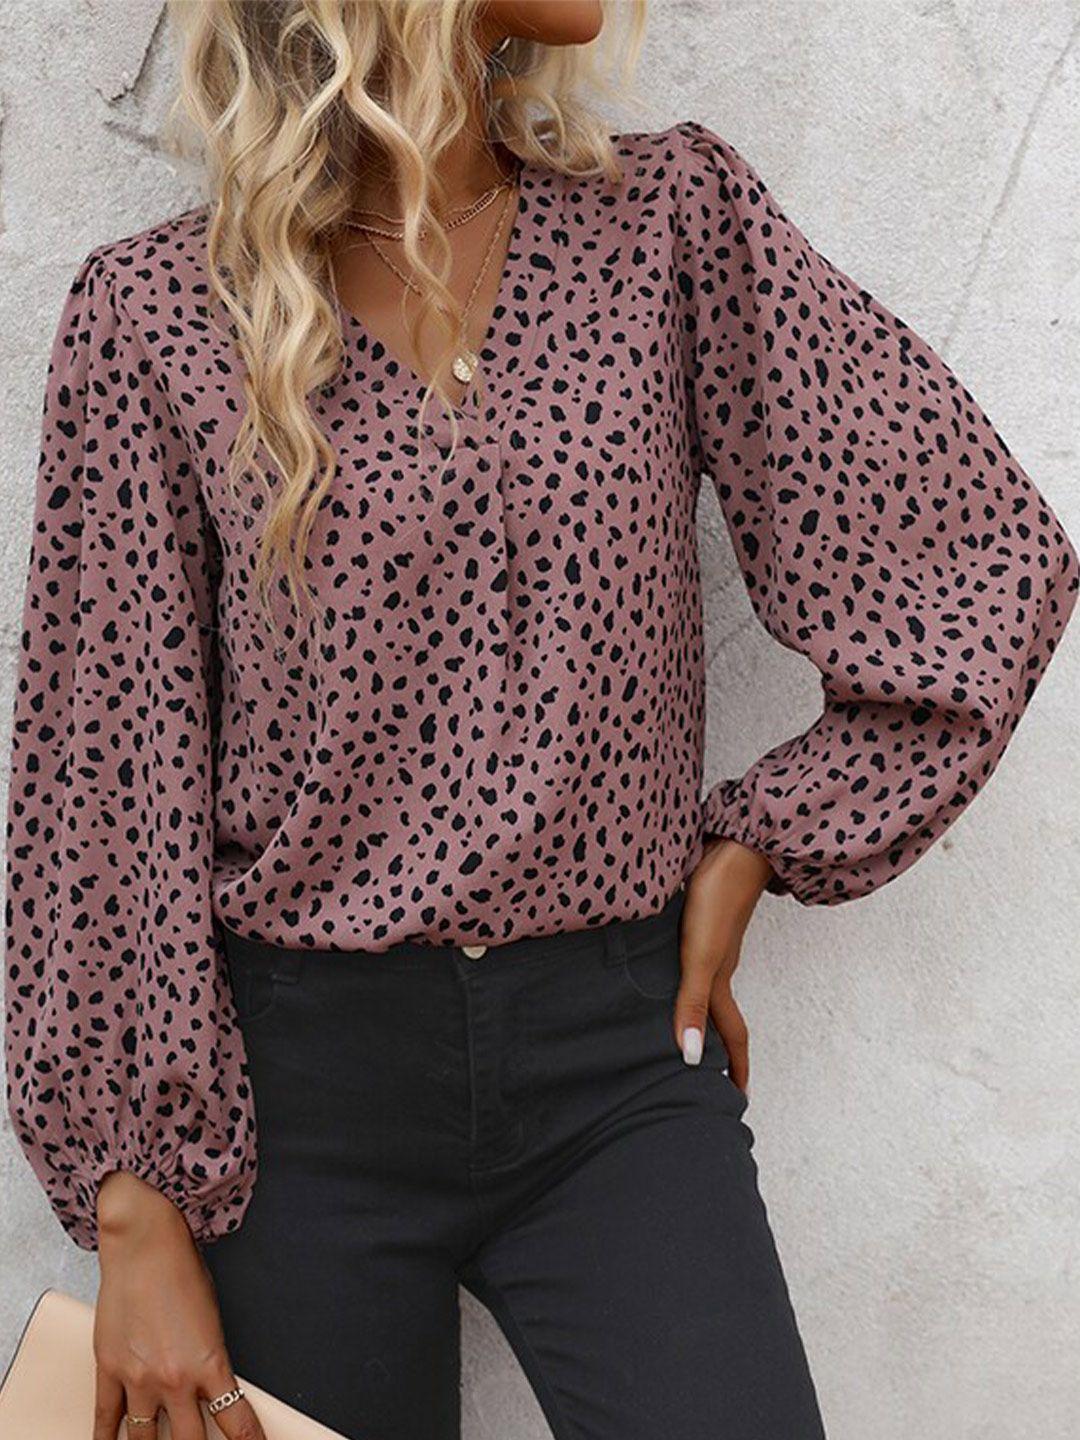 stylecast pink animal printed puff sleeves shirt style top